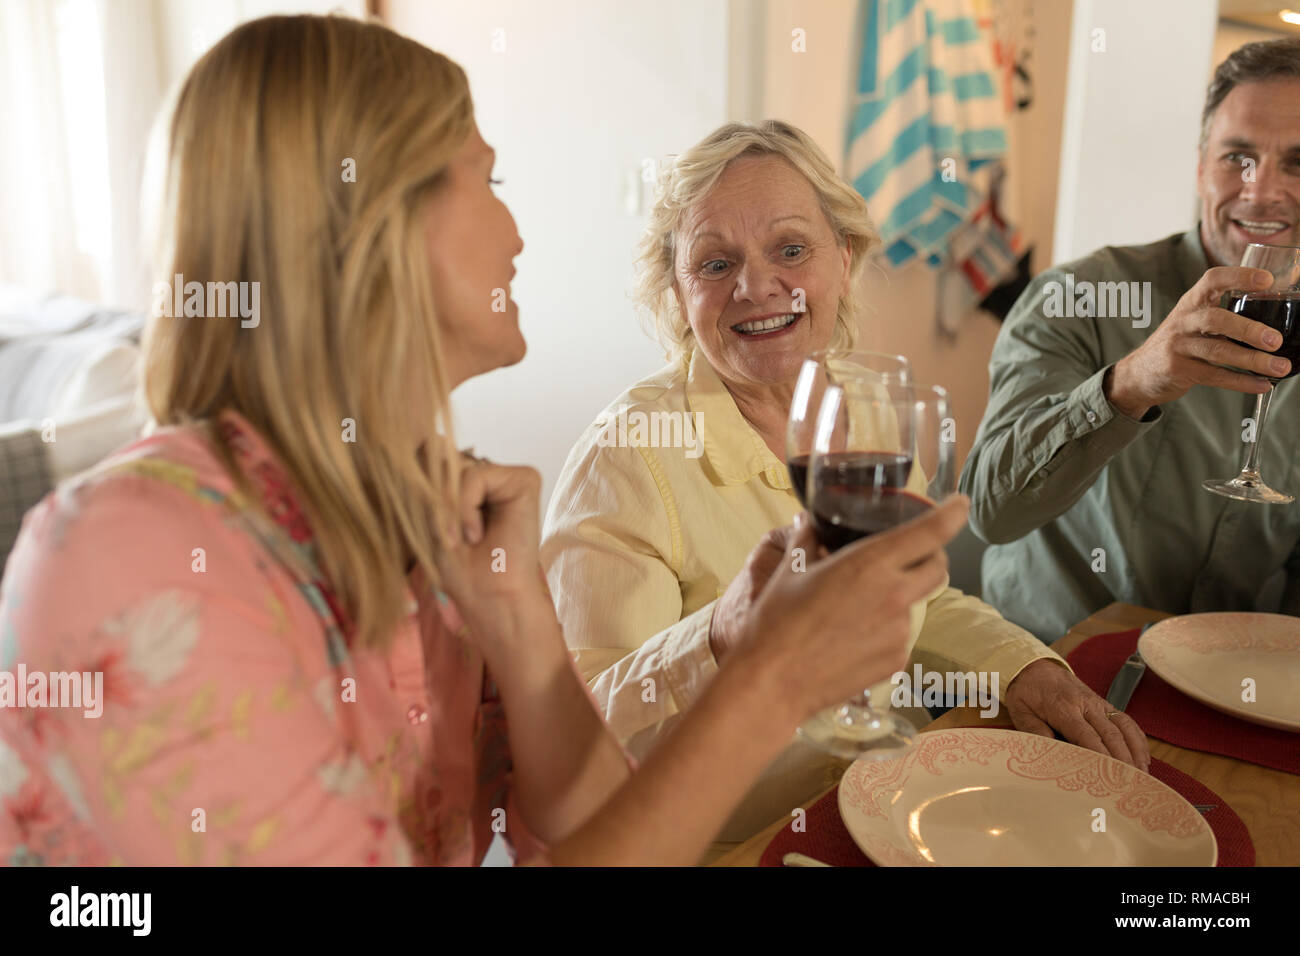 Family toasting glasses of wine on dining table Stock Photo